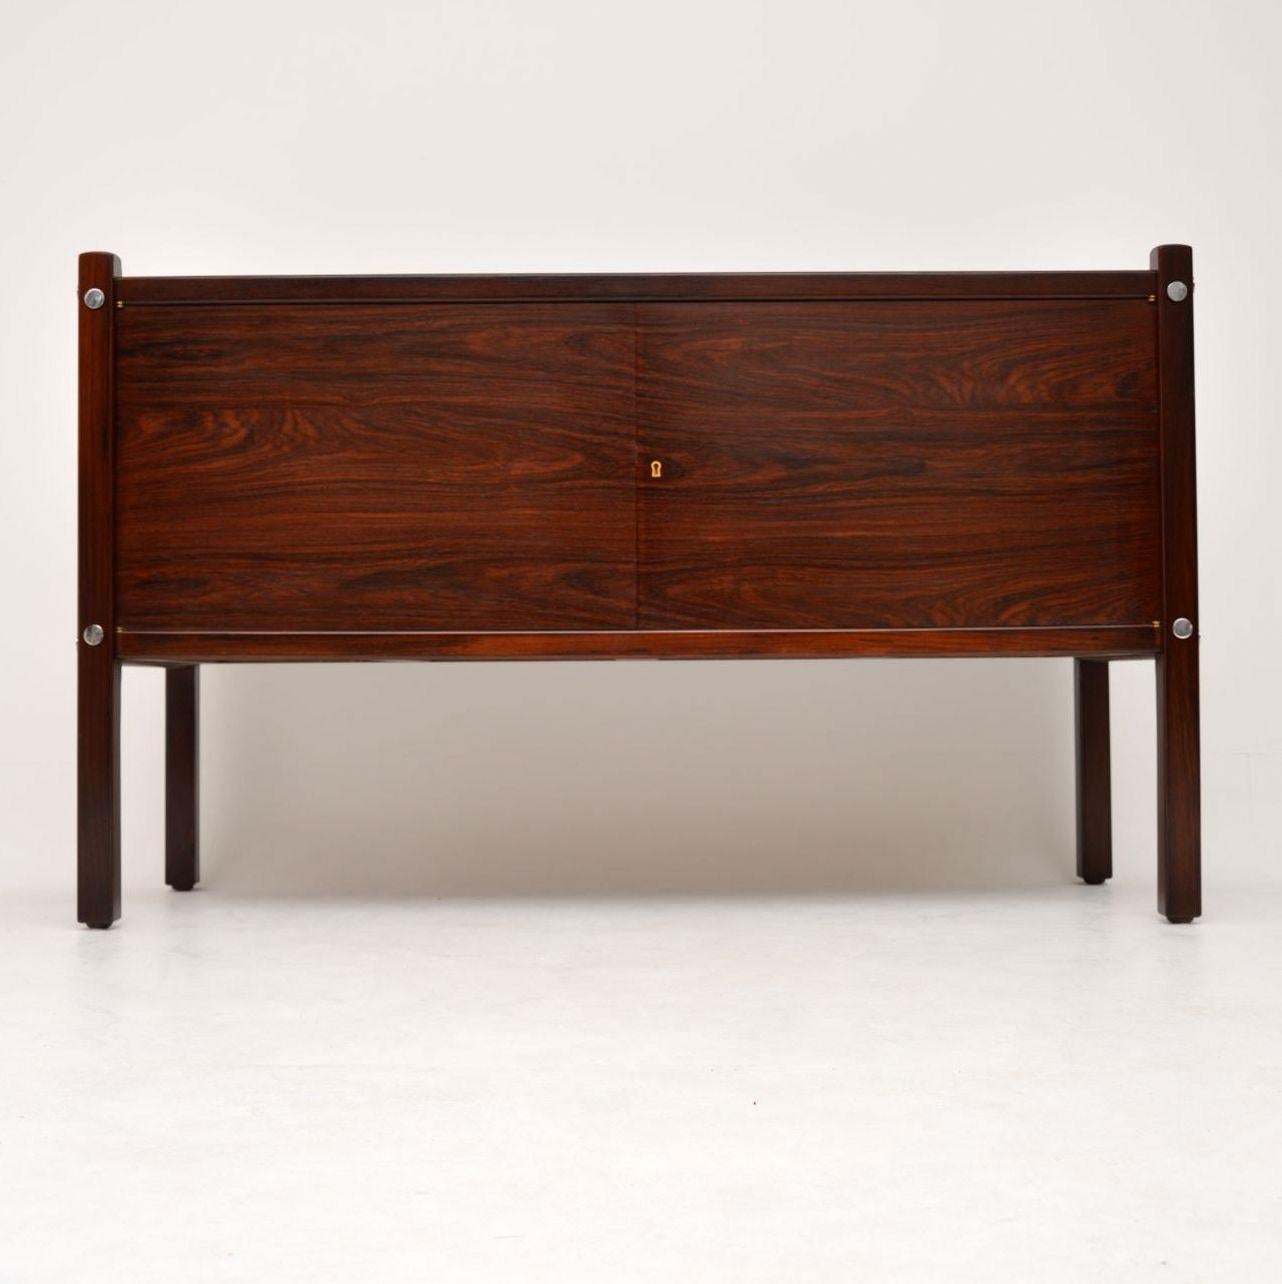 A stunning and extremely rare vintage sideboard by the important Brazilian designer Sergio Rodrigues. This model is called the Luciana sideboard, it was made in Brazil during the 1960s by OCA. We have had this stripped and re-polished to a very high